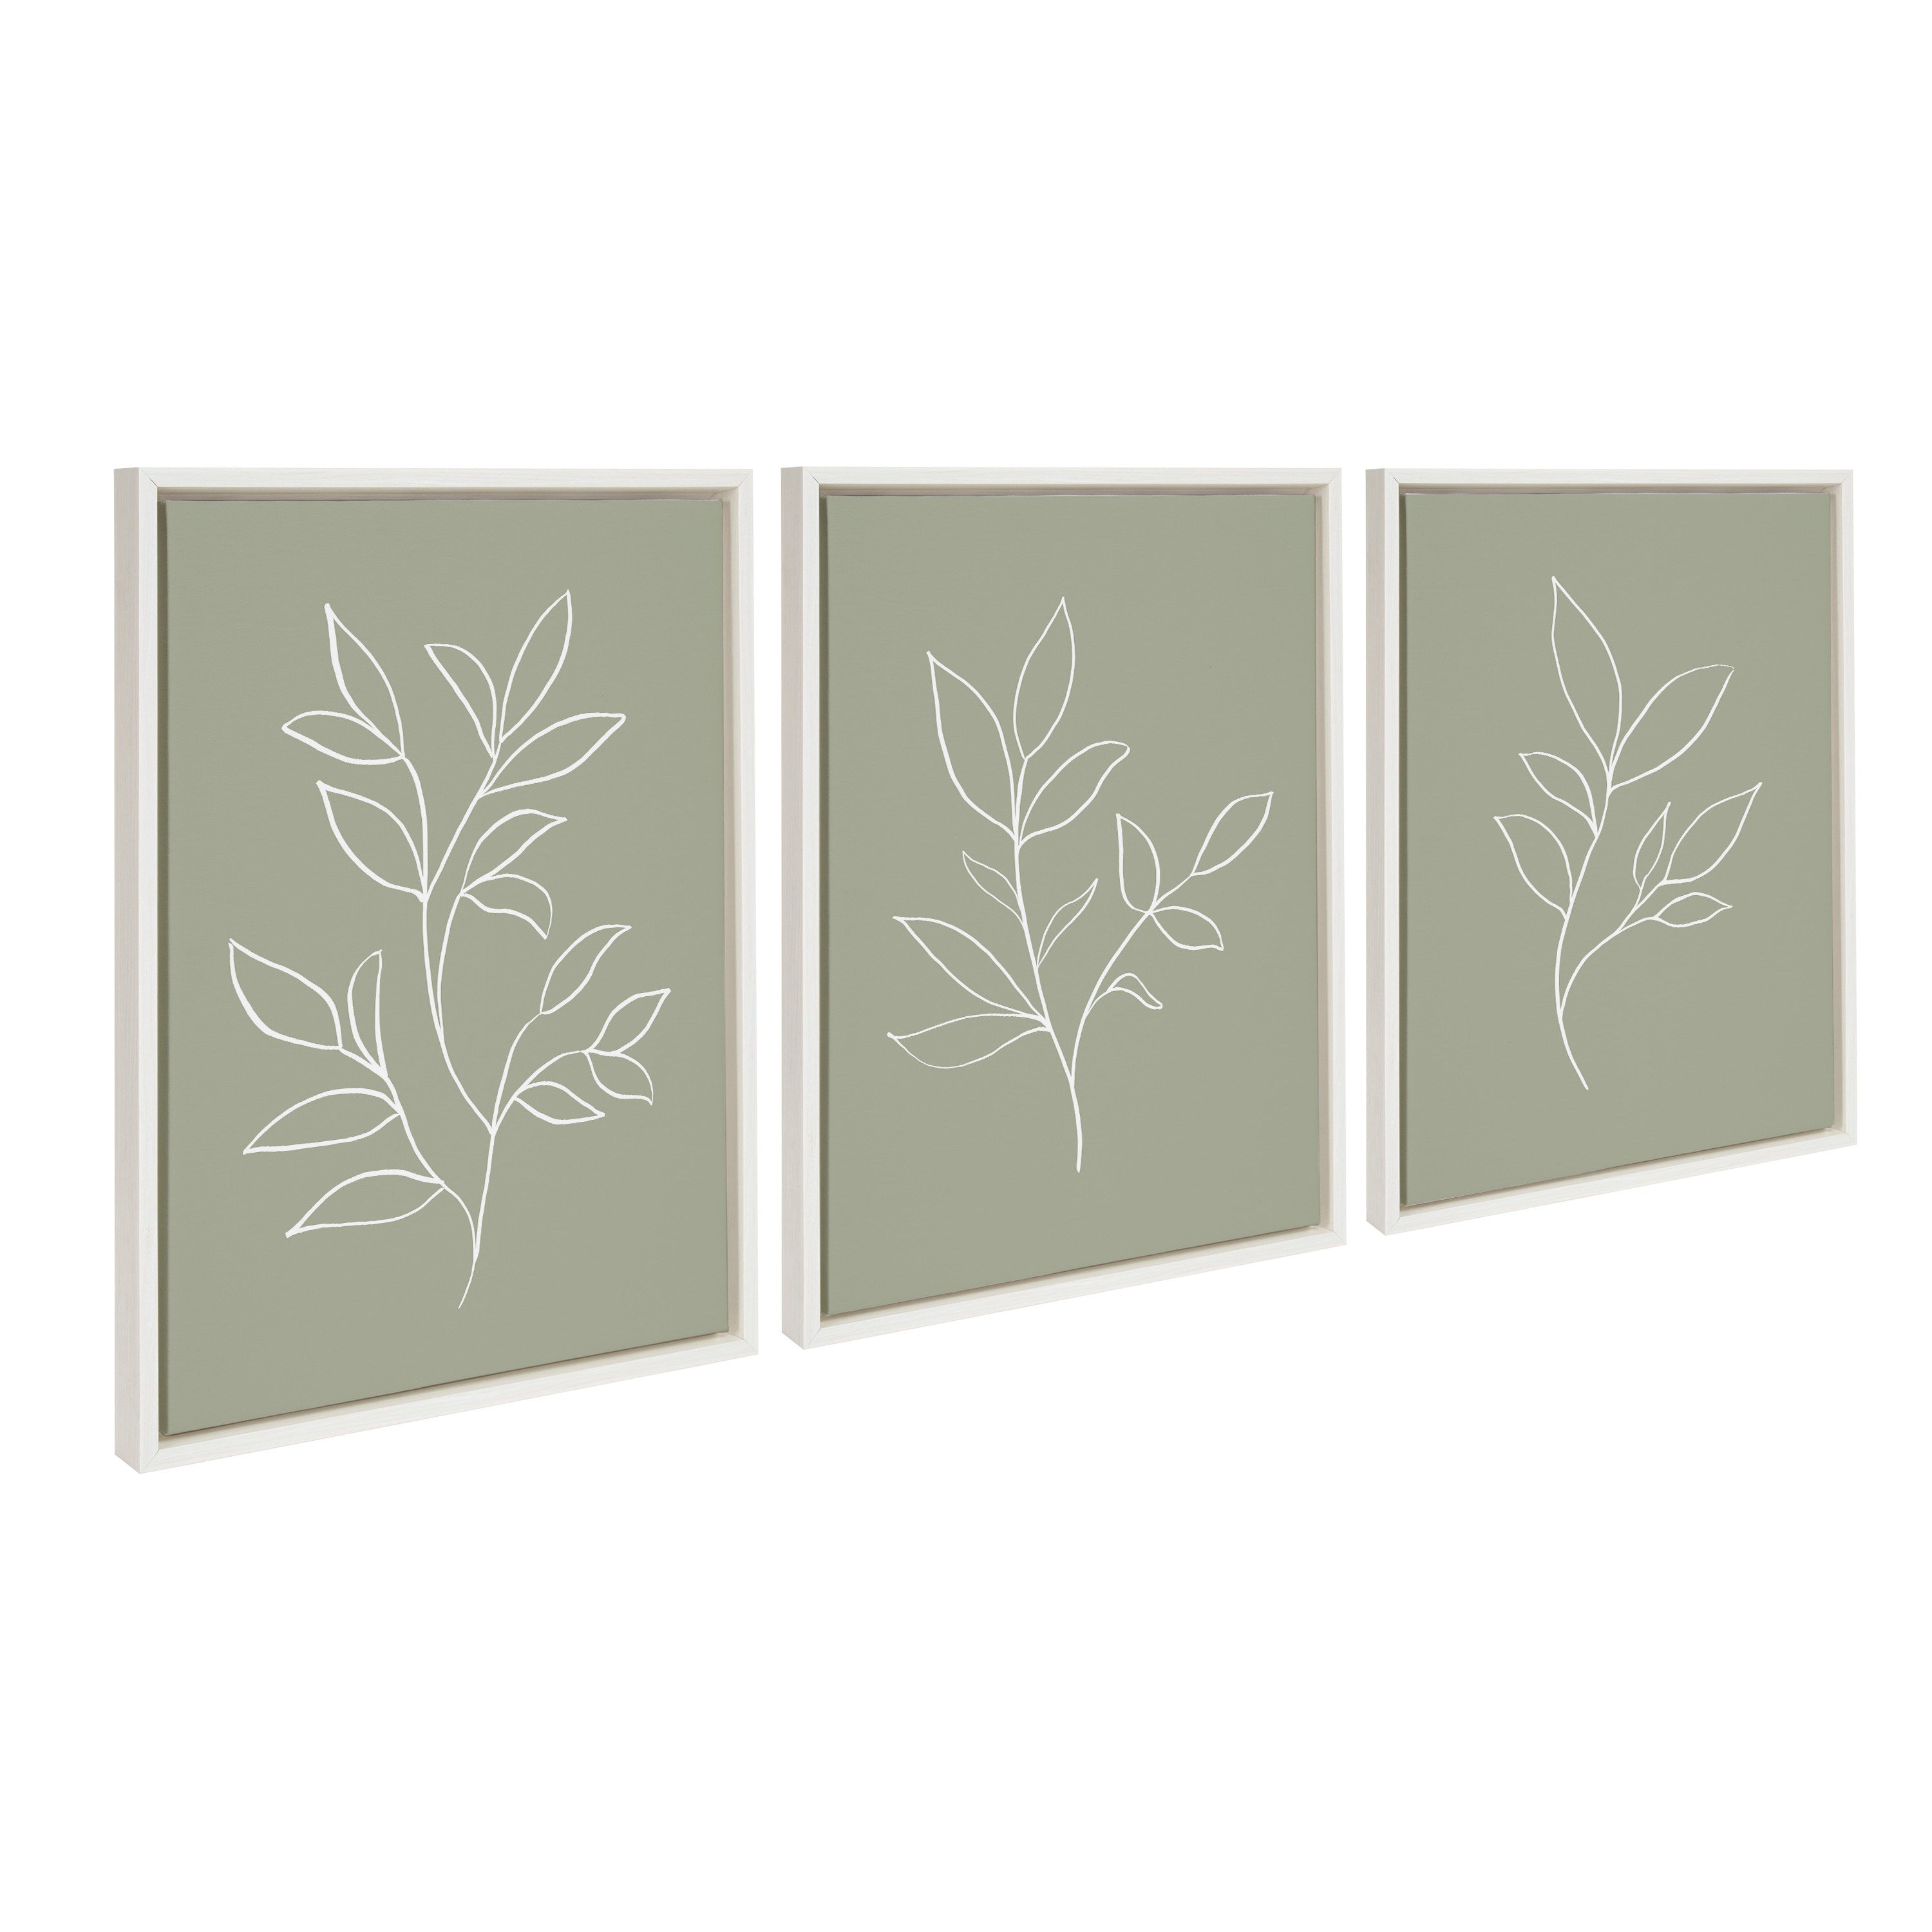 Sylvie Modern Sage Green Botanical Line Sketch Print 1, 2 and 3 Framed Canvas by The Creative Bunch Studio